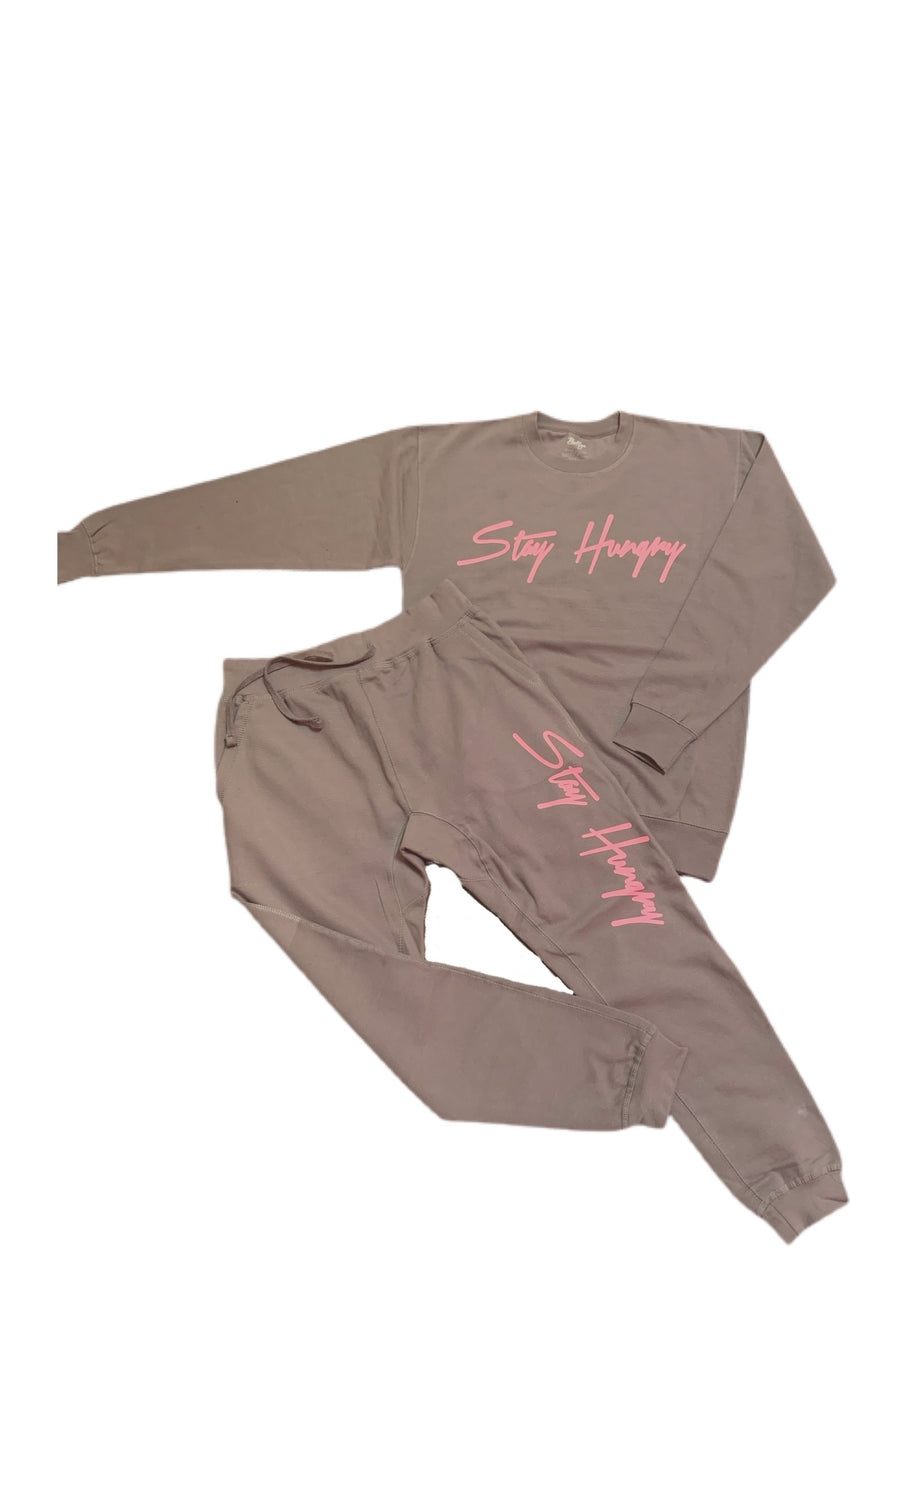 Stay Hungry Crewneck sweatsuit  Storm Grey with pink